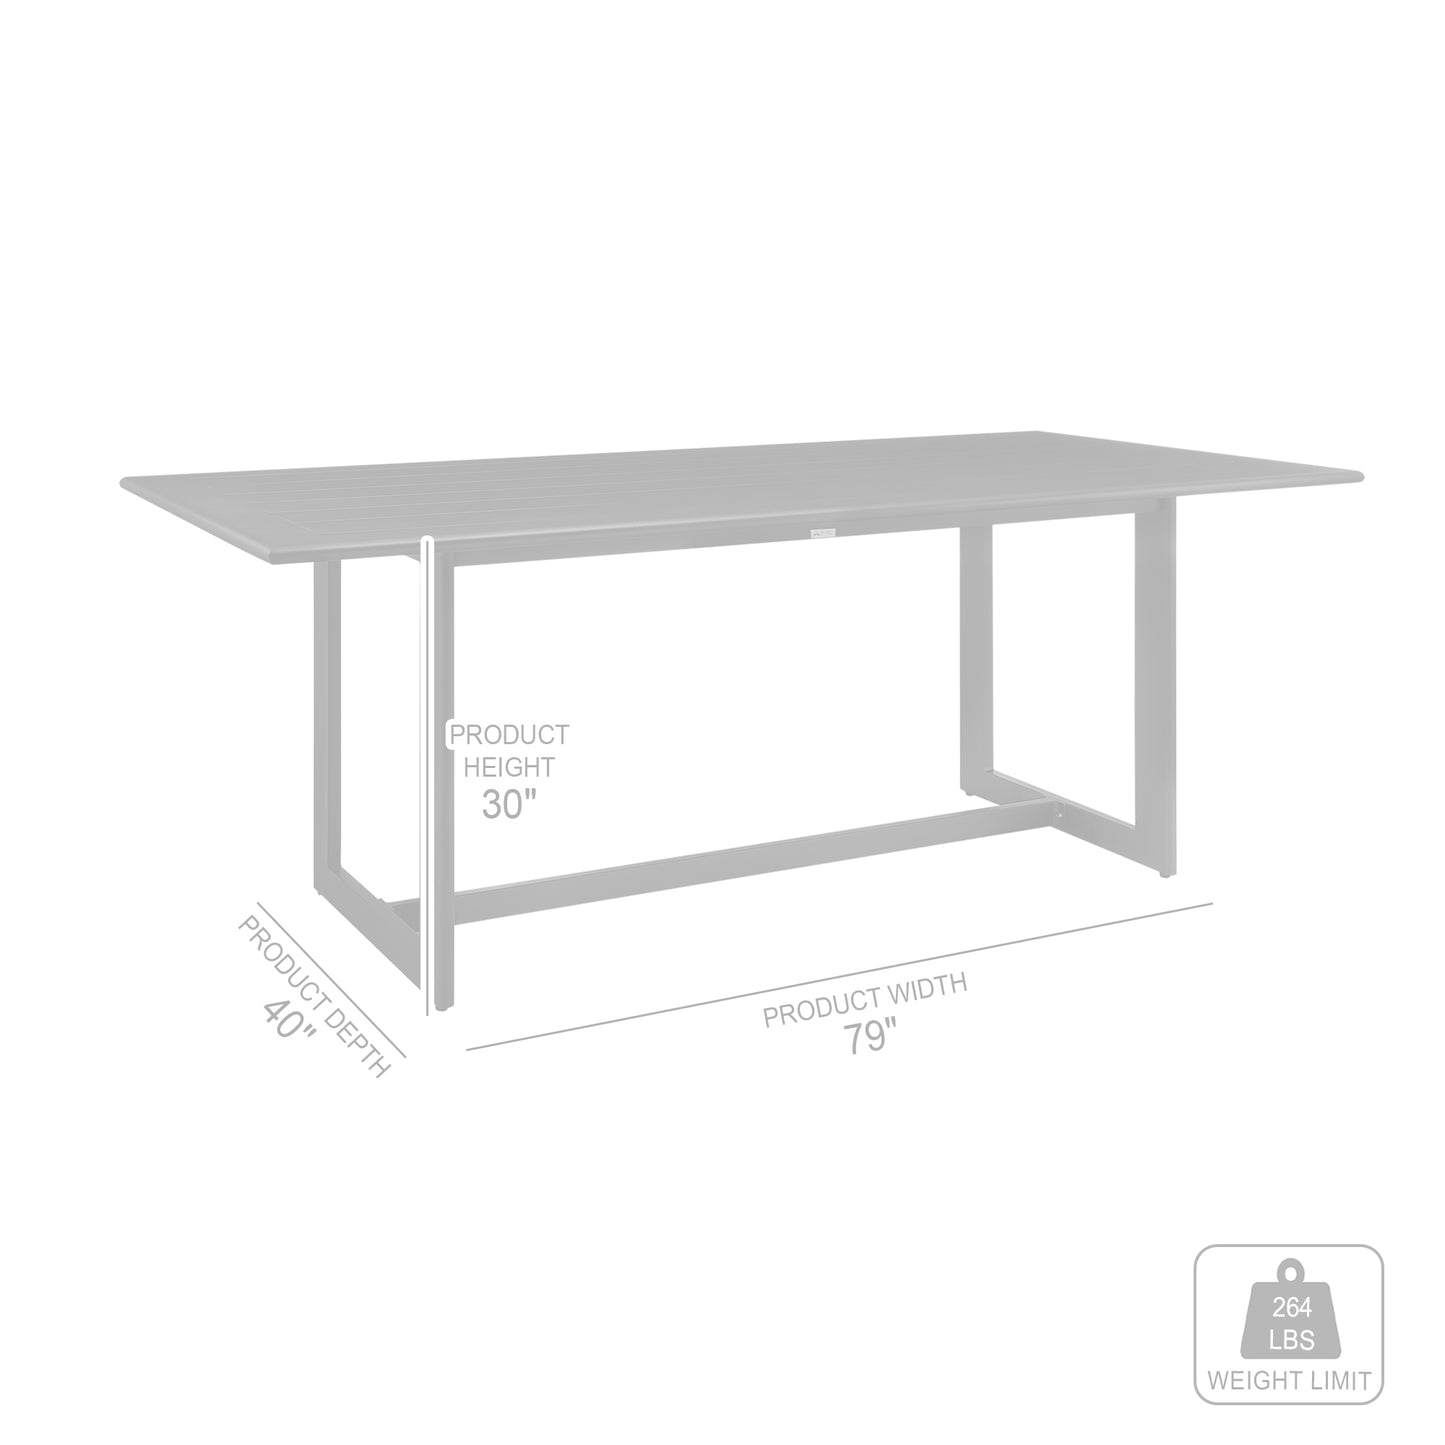 Cayman Outdoor Patio 5-Piece Dining Table Set in Aluminum with Gray Cushions